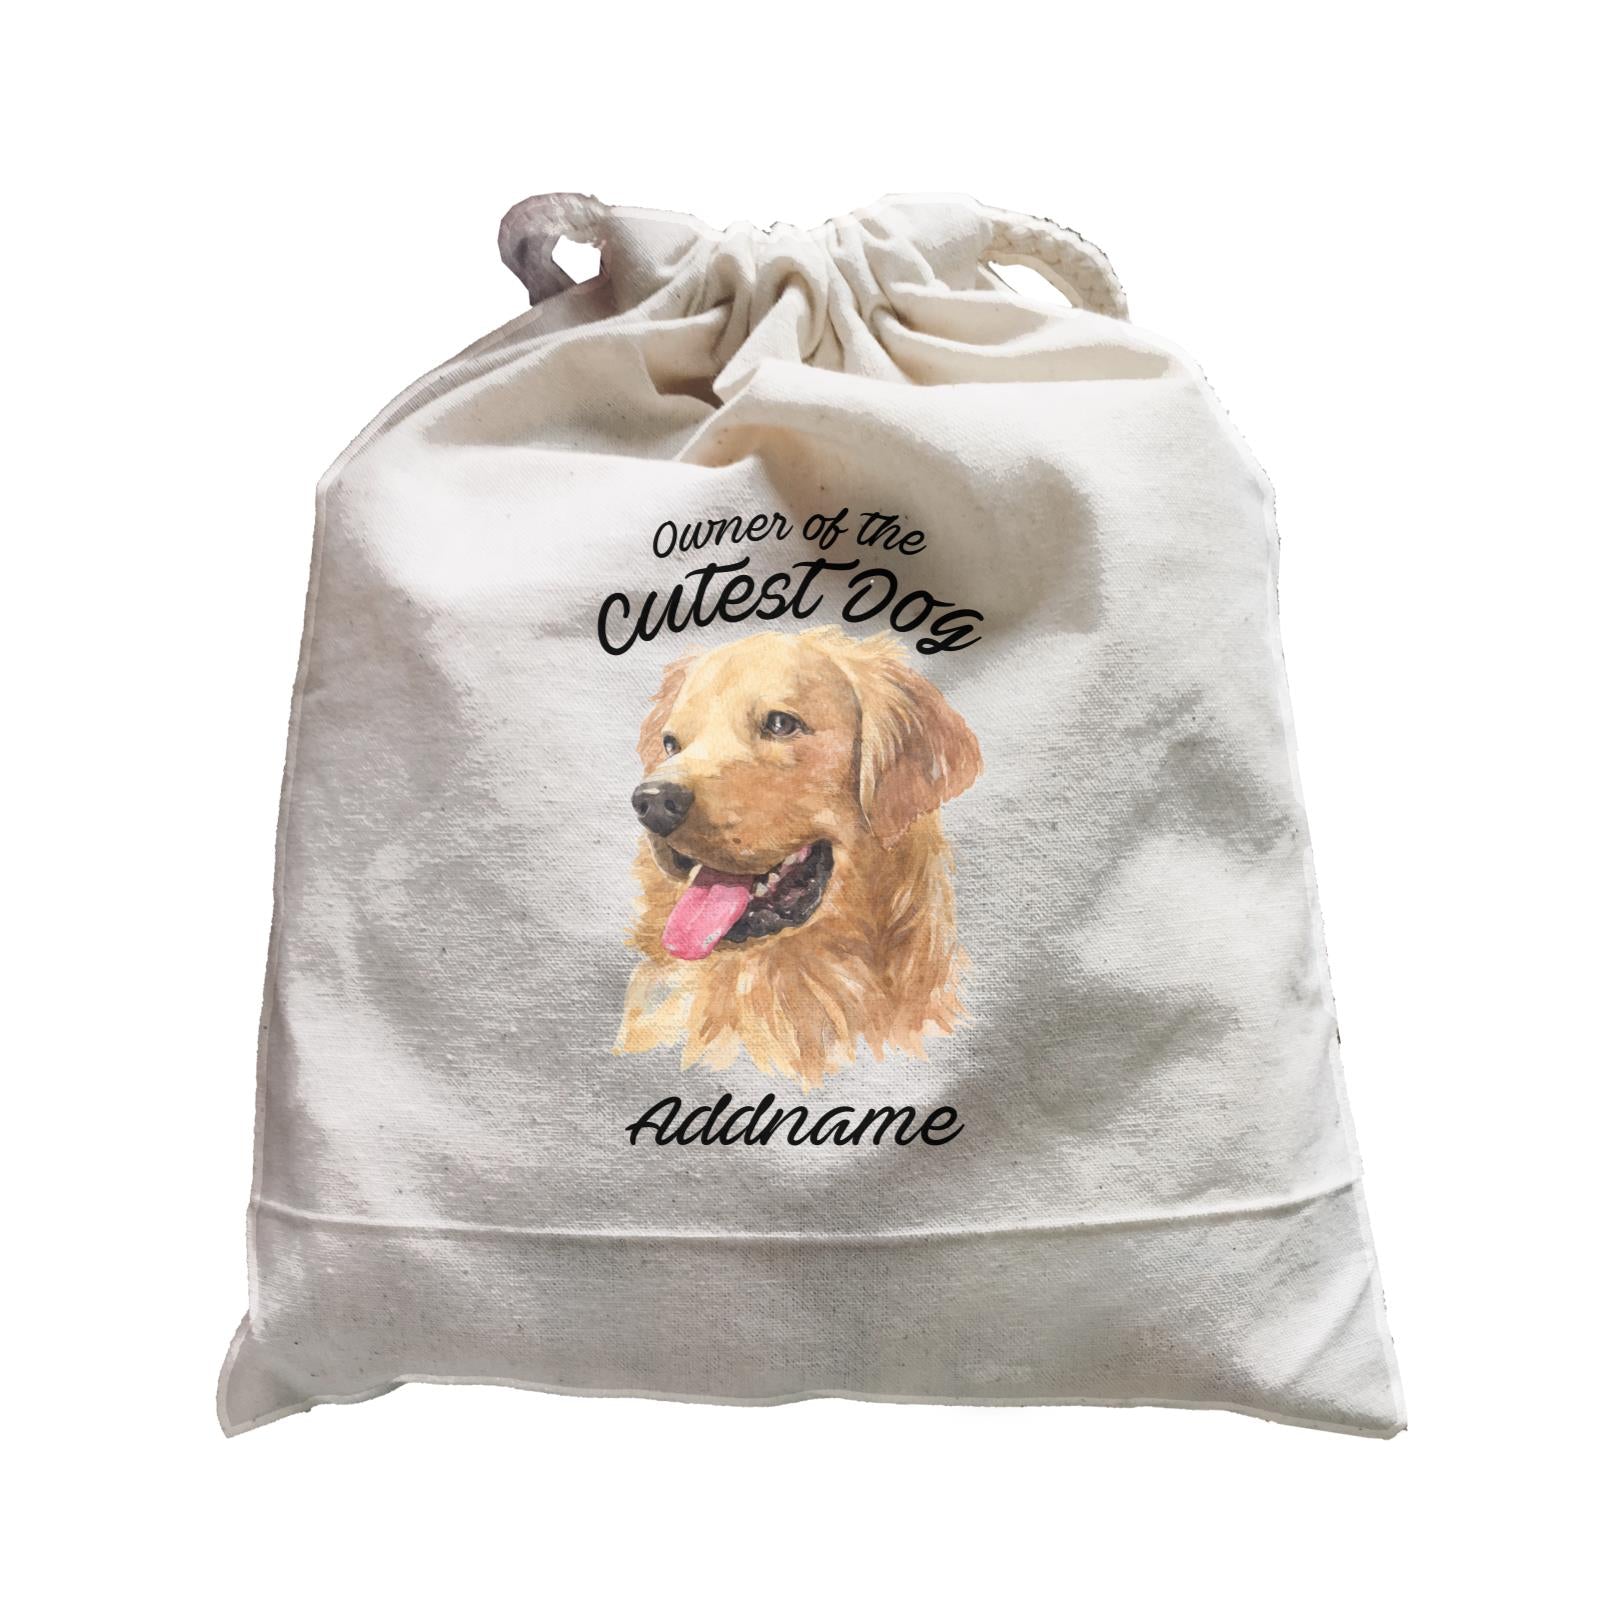 Watercolor Dog Owner Of The Cutest Dog Golden Retriever Left Addname Satchel